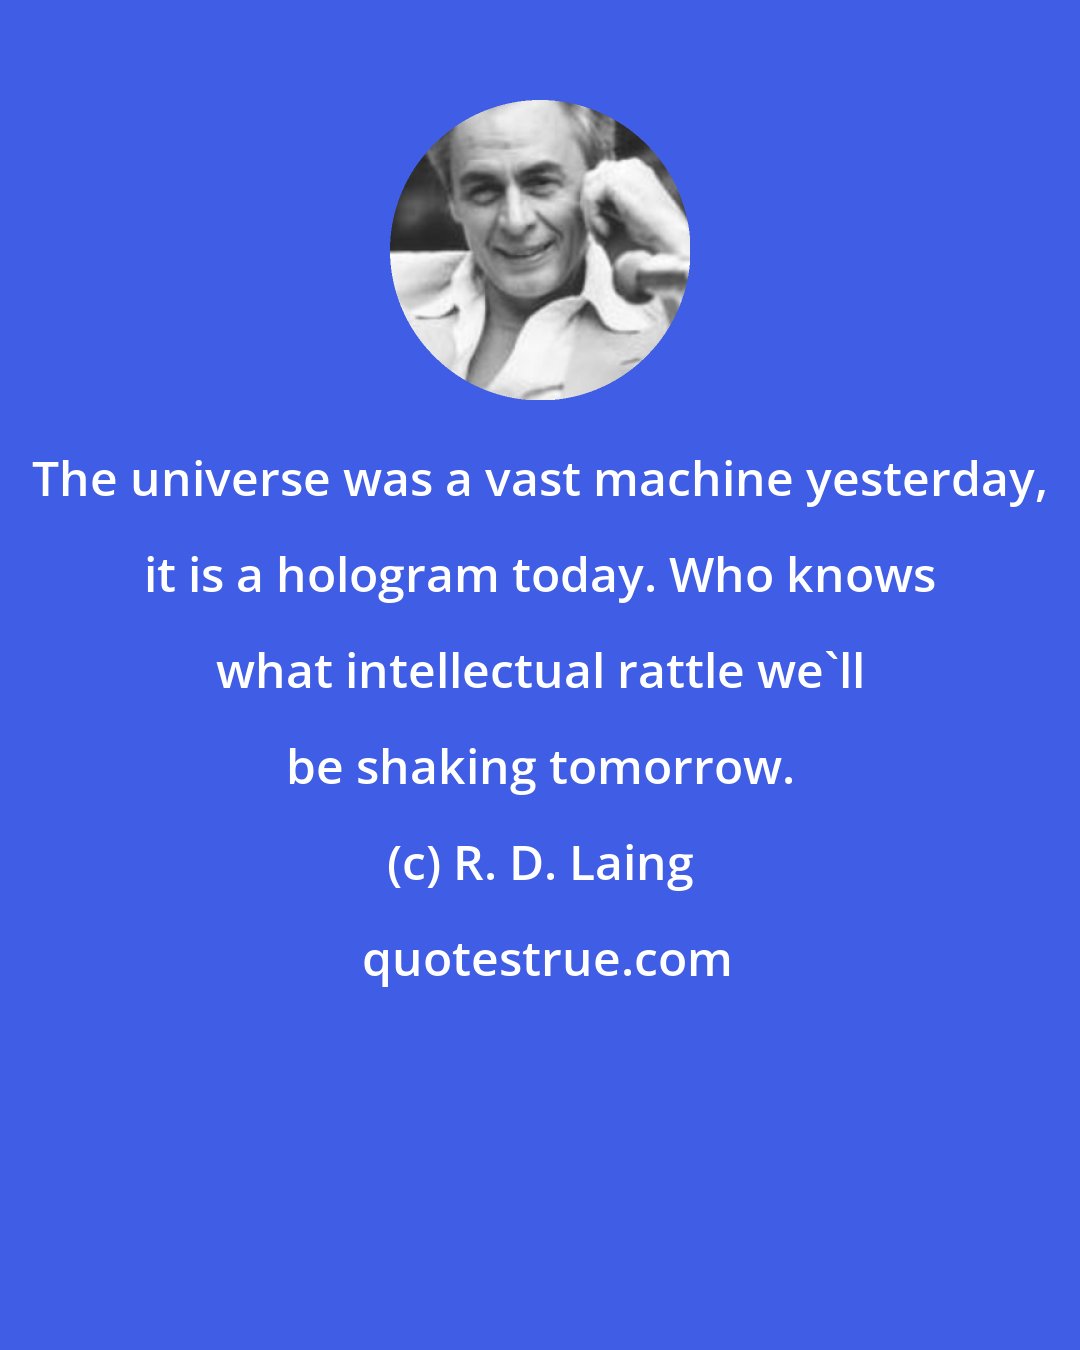 R. D. Laing: The universe was a vast machine yesterday, it is a hologram today. Who knows what intellectual rattle we'll be shaking tomorrow.